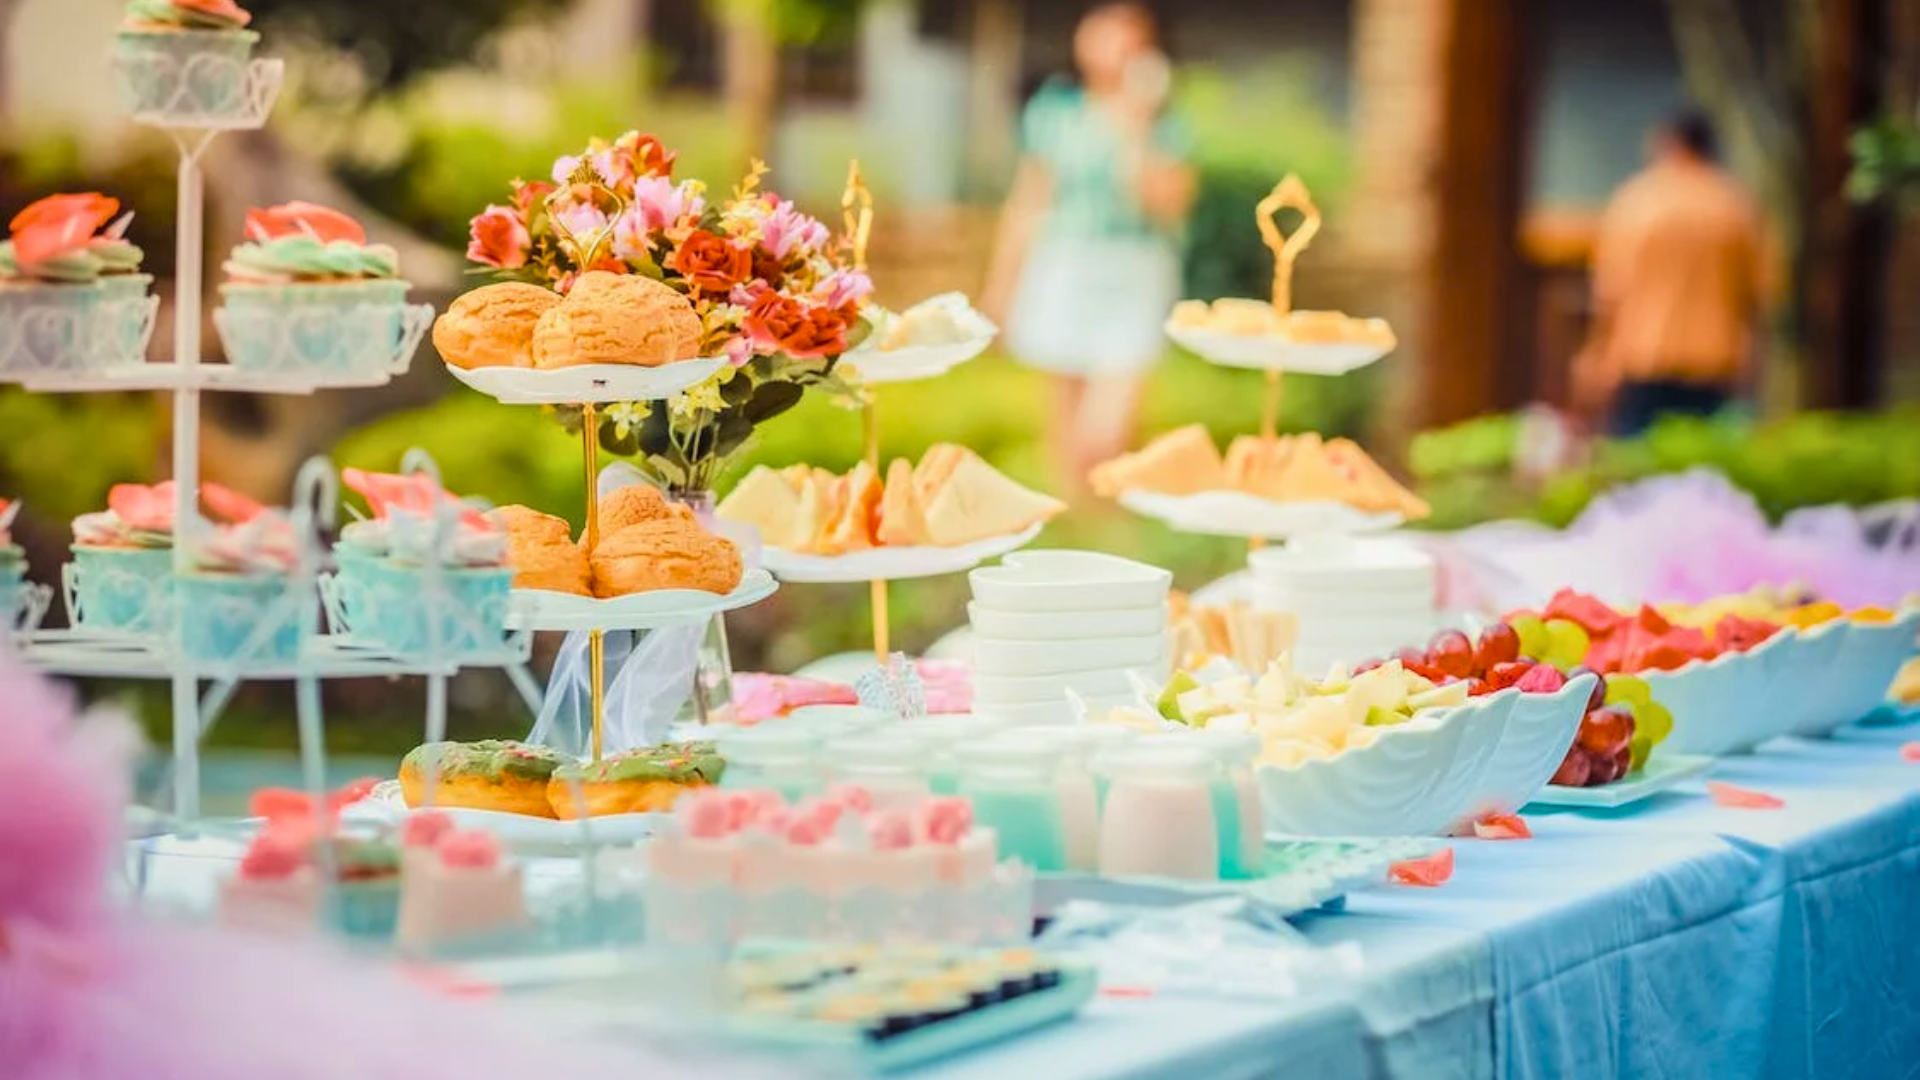 How to avoid wedding catering mistakes in malaysia malaysia food caterer malaysia wedding food caterer kl food caterer selangor food caterer what should i consider when planning my weddding